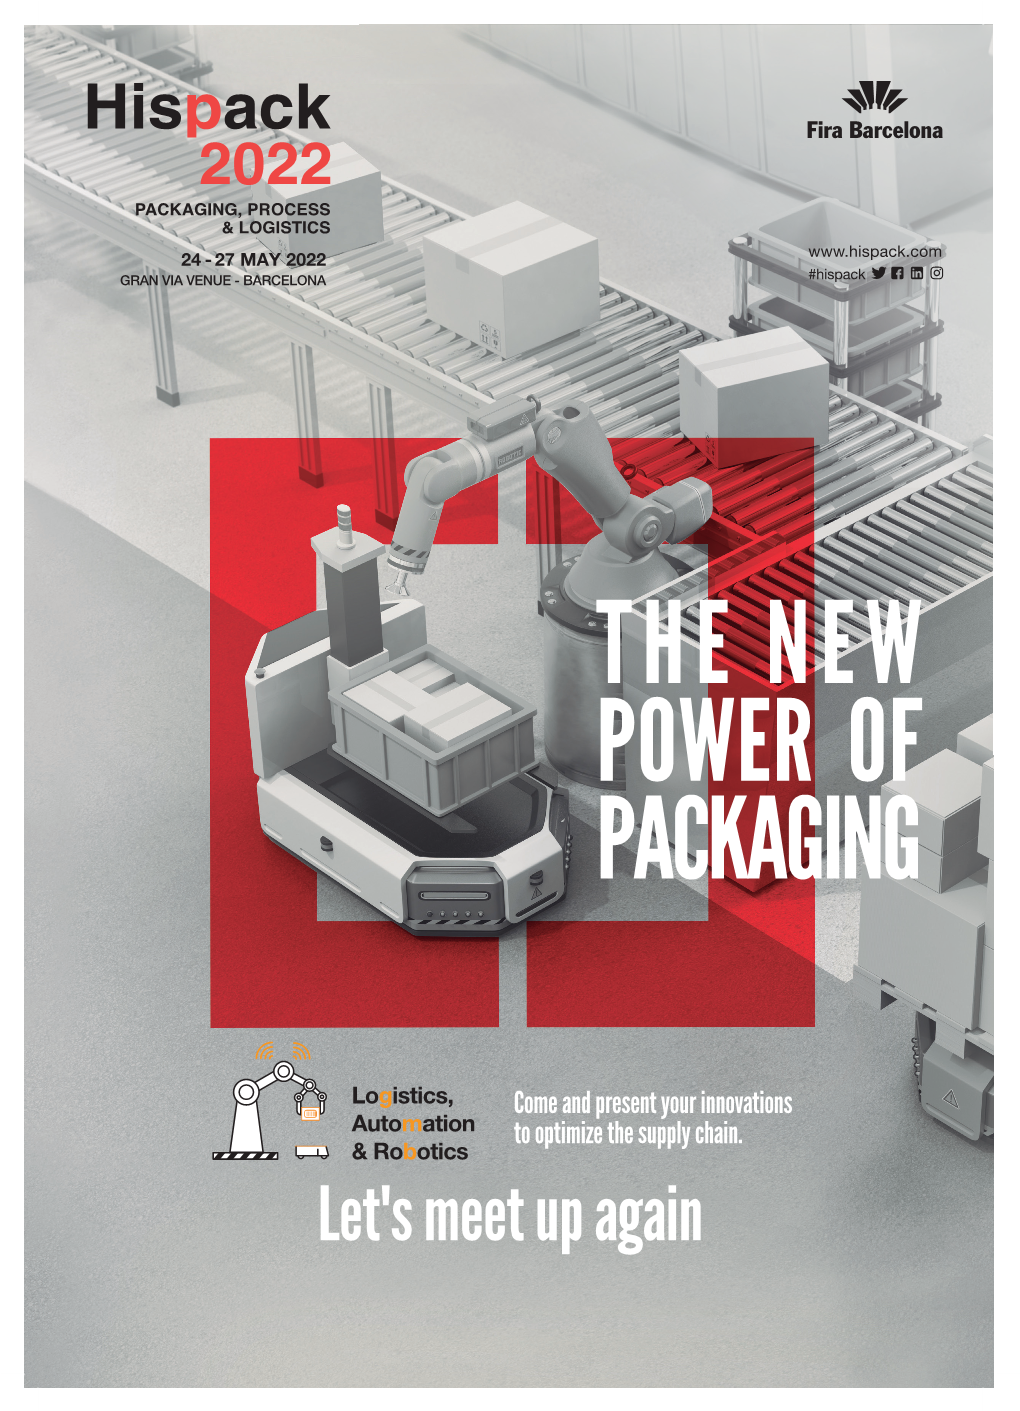 Let's Meet up Again DRIVING the NEW POWER of PACKAGING